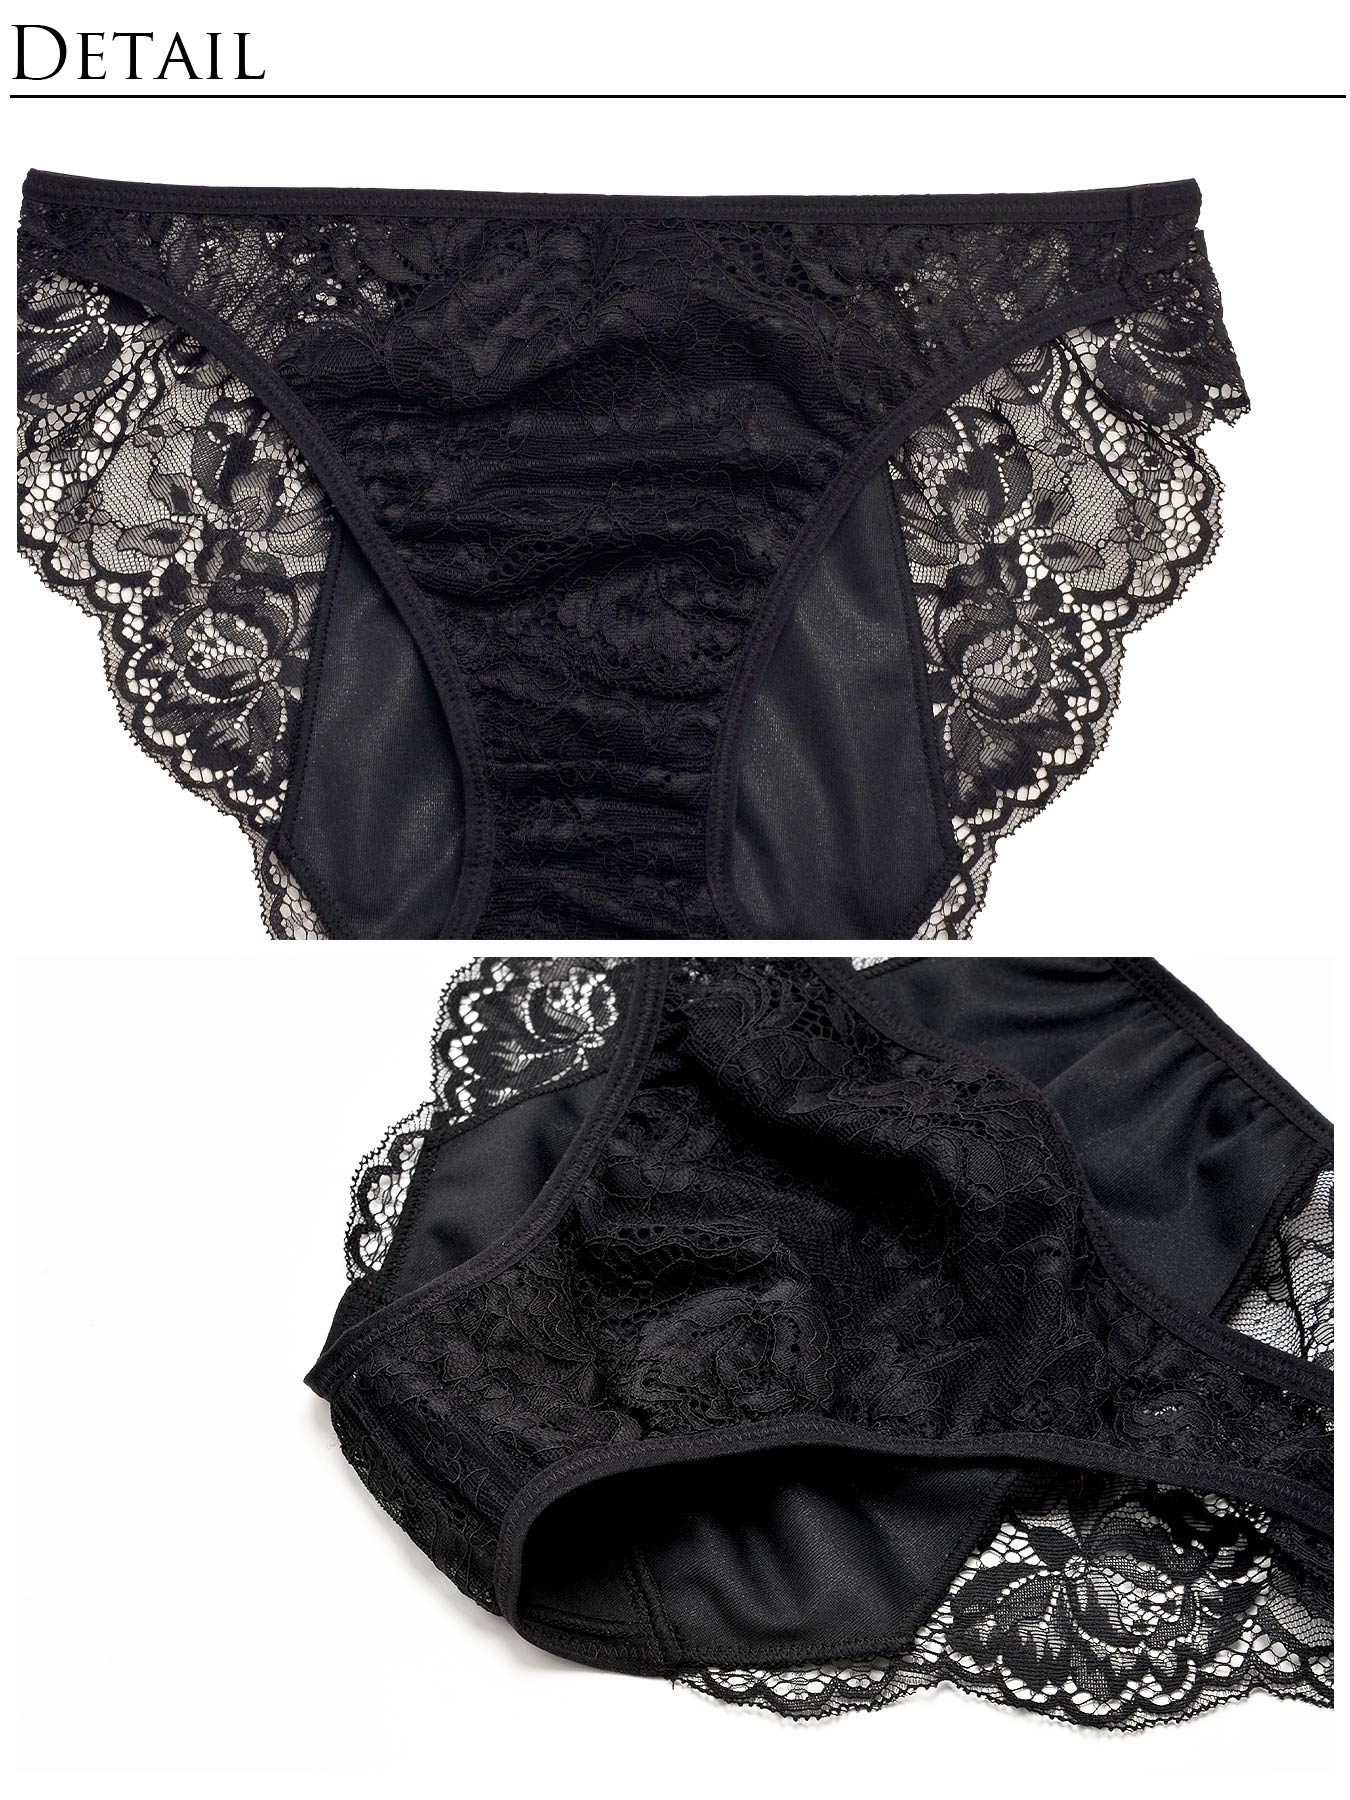 【Re；by Reinest】DIVA BRA series 24h Souffle Sanitary Shorts/スフレサニタリー単品フルバックショーツ